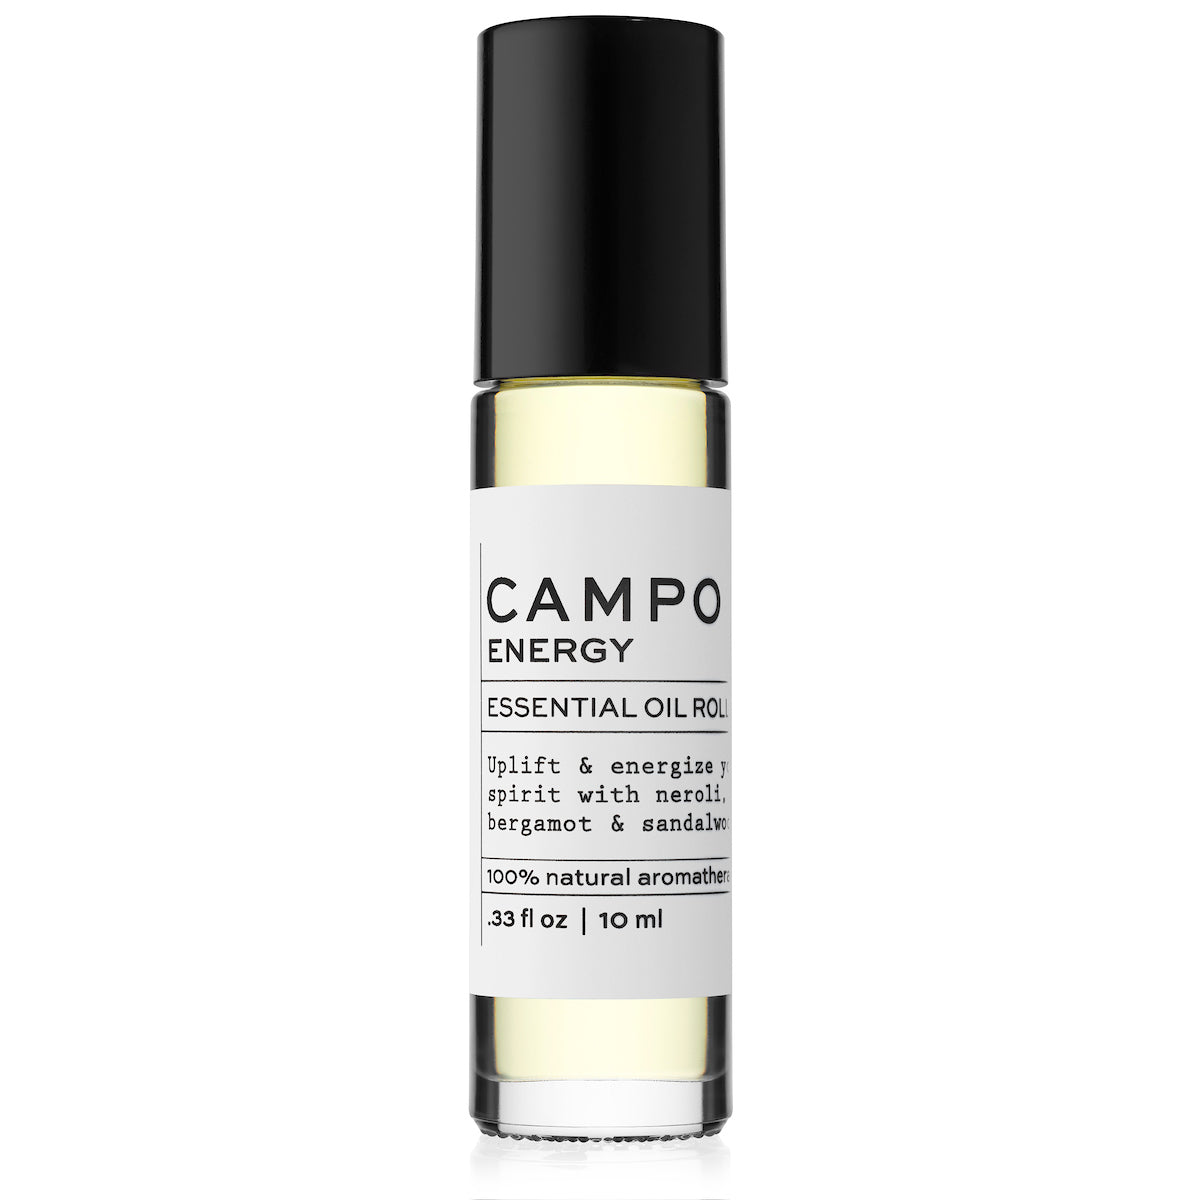 Campo Beauty ENERGY Blend Essential Oil Roll-On in 5 ml. Restores a sense of vitality and alertness. Uplift & energize your spirits naturally with this 100% pure essential oil roll-on blend of Neroli Orange Blossom, Bergamot, Sweet Orange, and Bitter Orange with a hint of Sandalwood. A refreshing and distinctive rich citrus scent with sweet and flowery notes. Pre-blended with 100% natural beauty carrier oils, so it's jet-set and ready to roll!